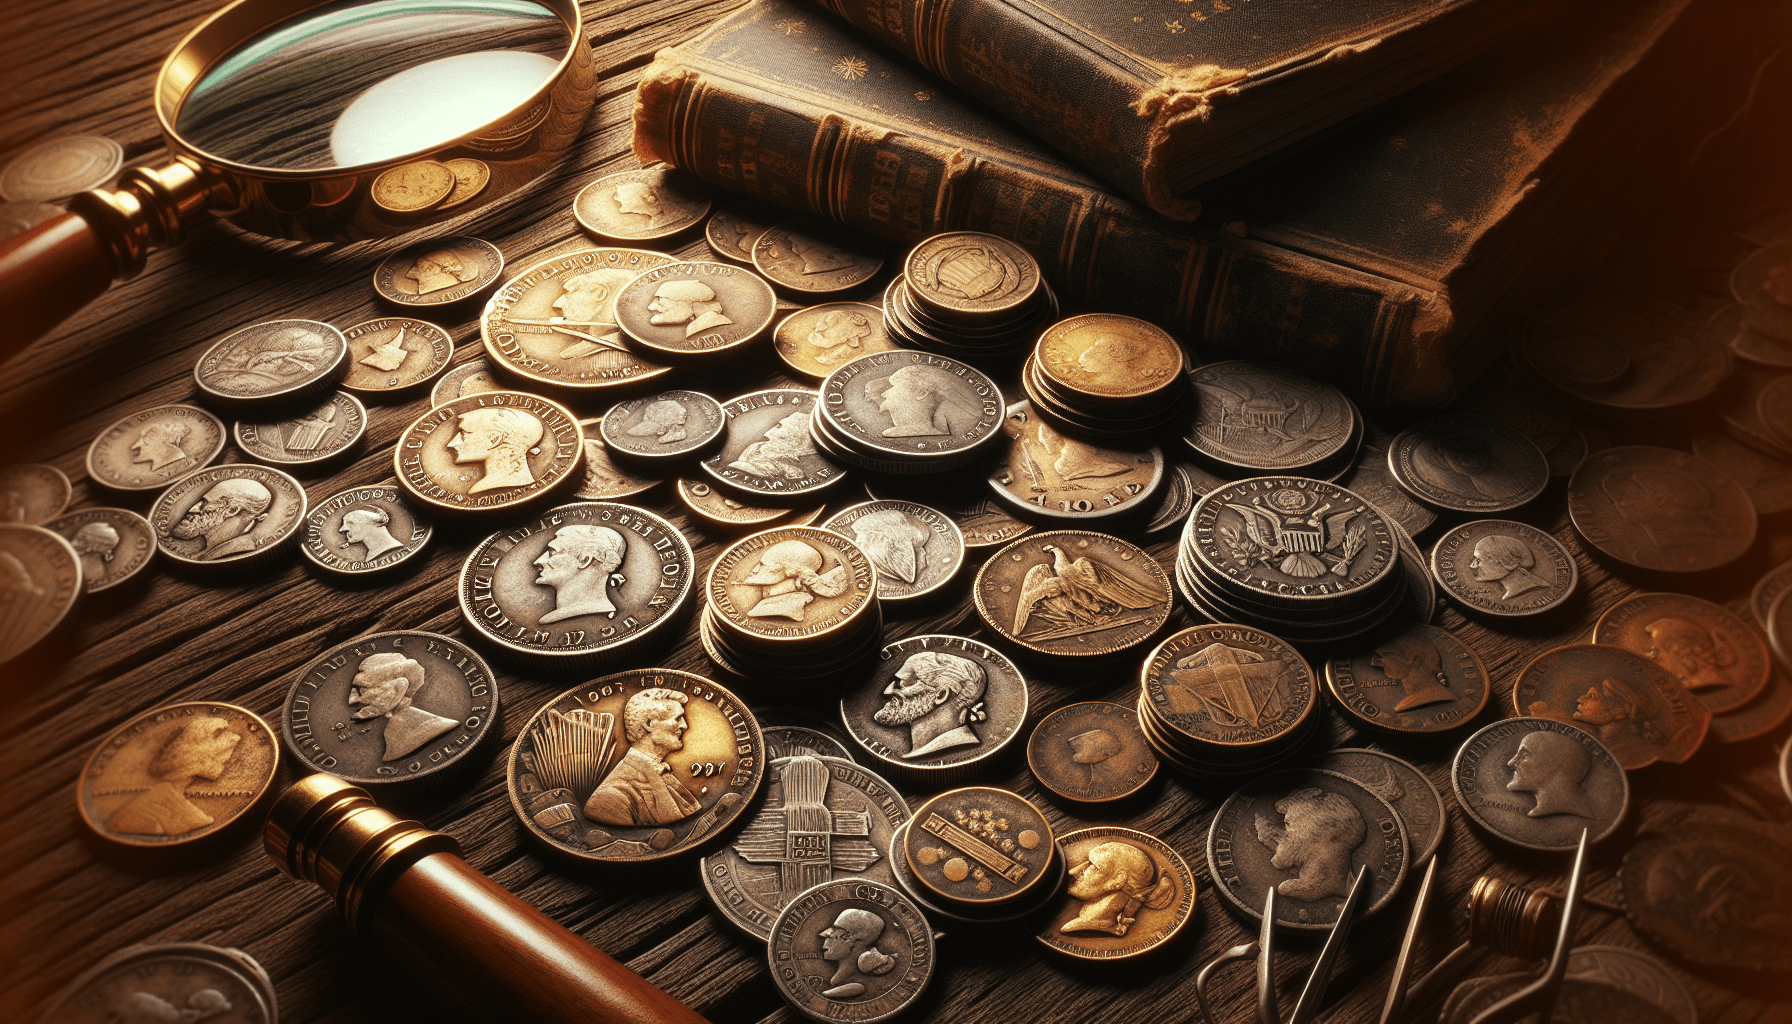 The Hidden Treasure: Uncovering the Top 100 American Coins Worth Money